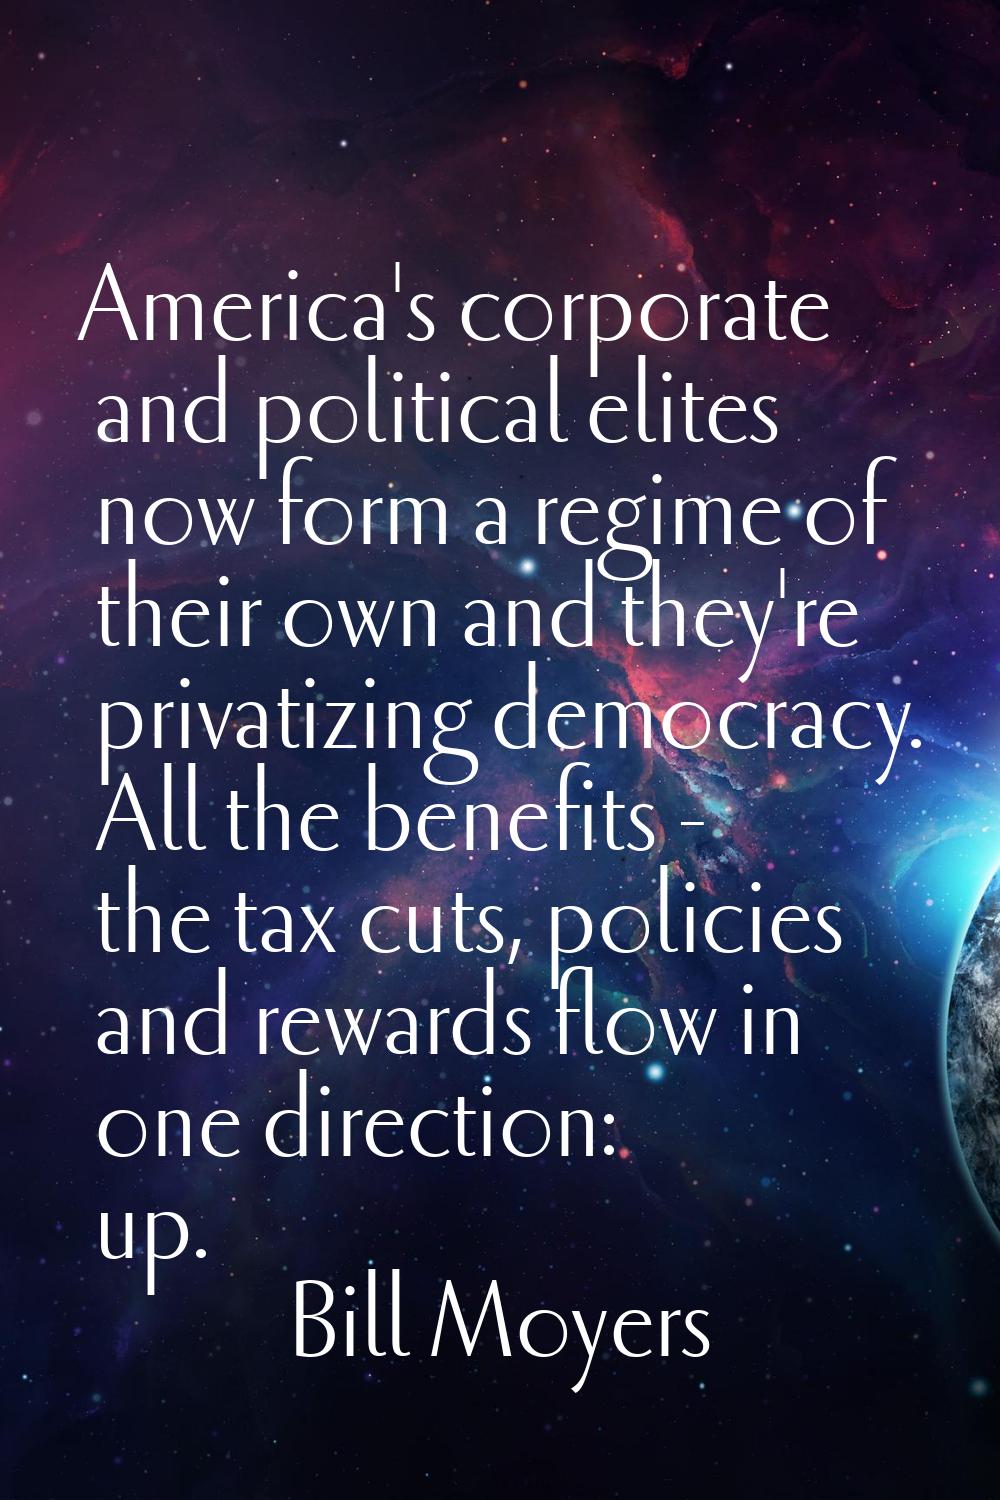 America's corporate and political elites now form a regime of their own and they're privatizing dem